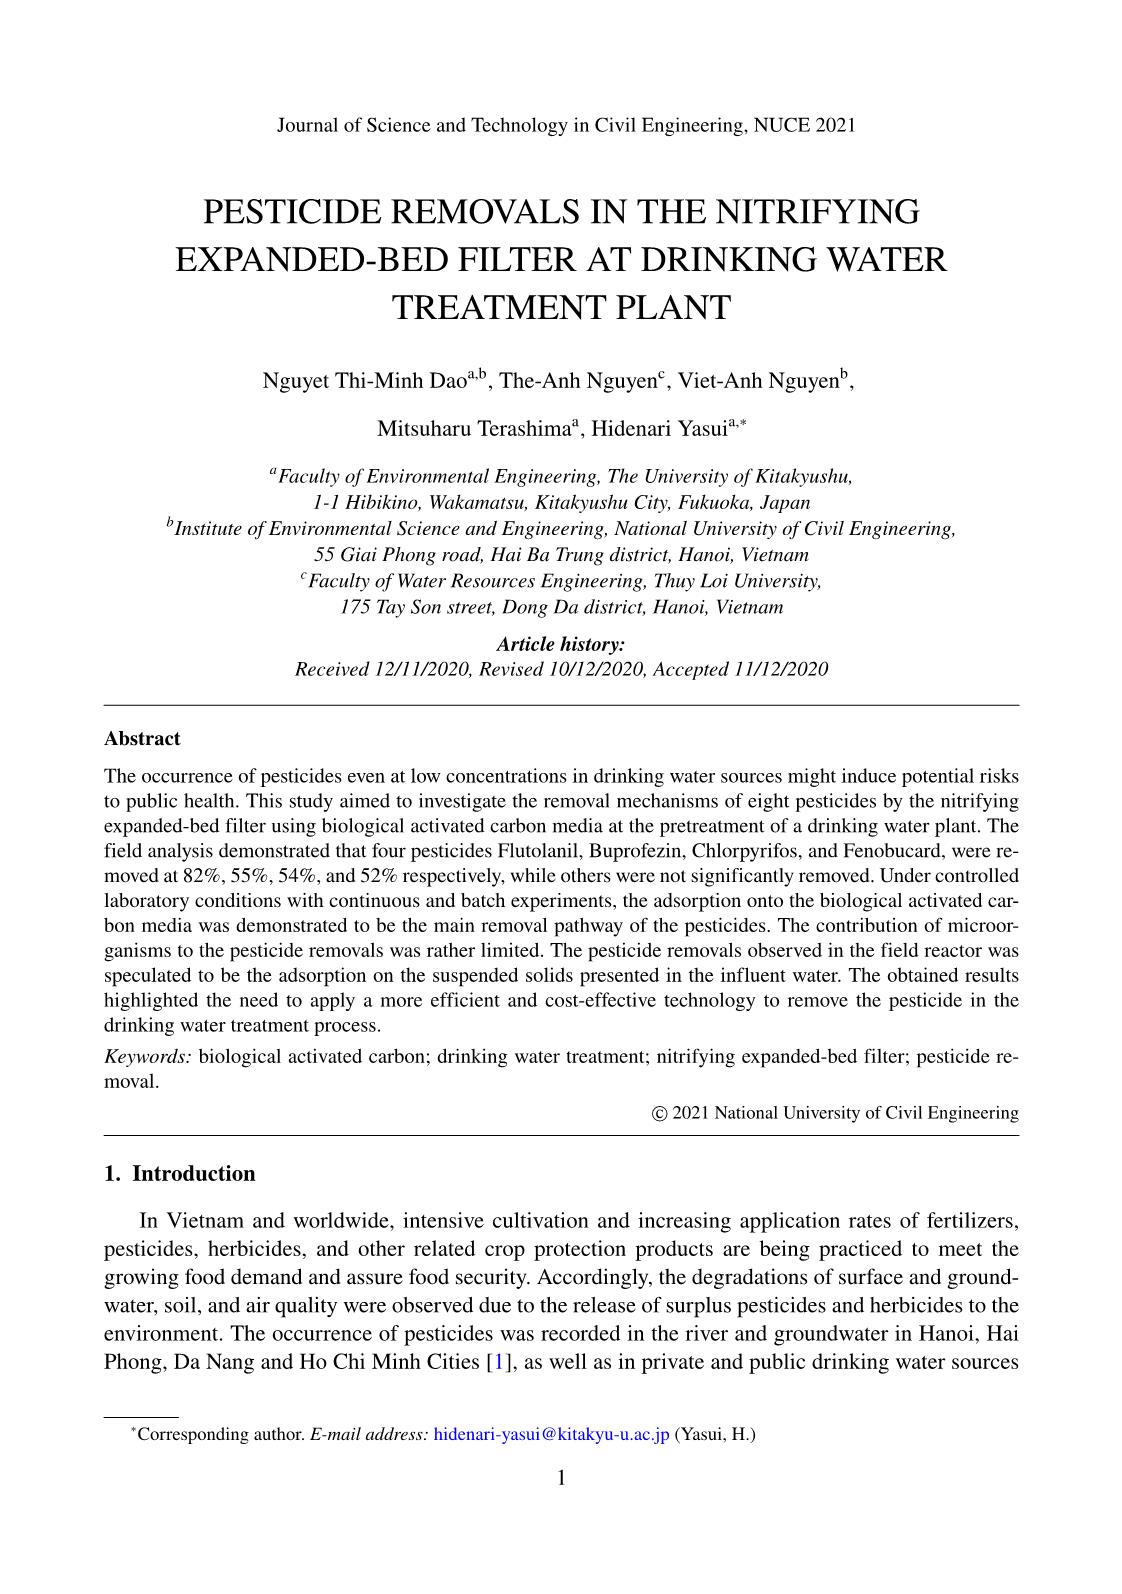 Pesticide removals in the nitrifying expanded - Bed filter at drinking water treatment plant trang 1